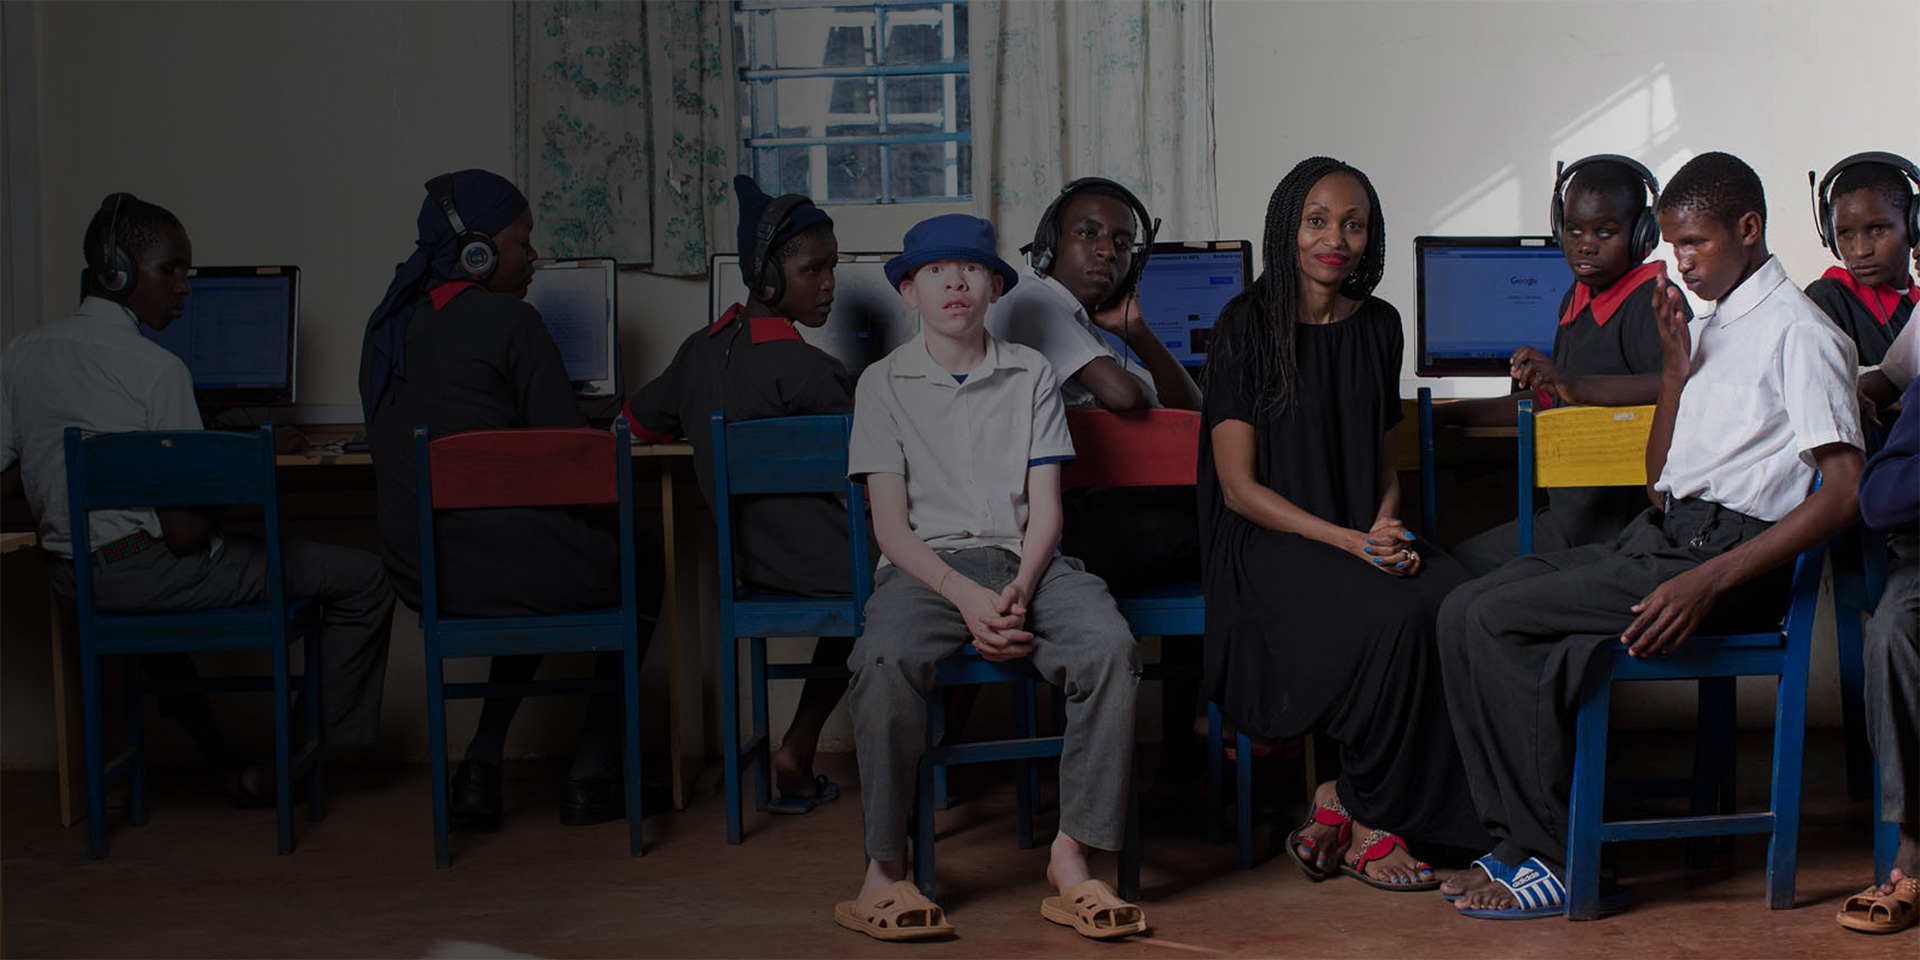 Irene Mbari-Kirika, Founder & Executive Director of inABLE smiles at the camera while seated next to students in an accessibility lab at Thika Primary School For the Blind, Kenya.